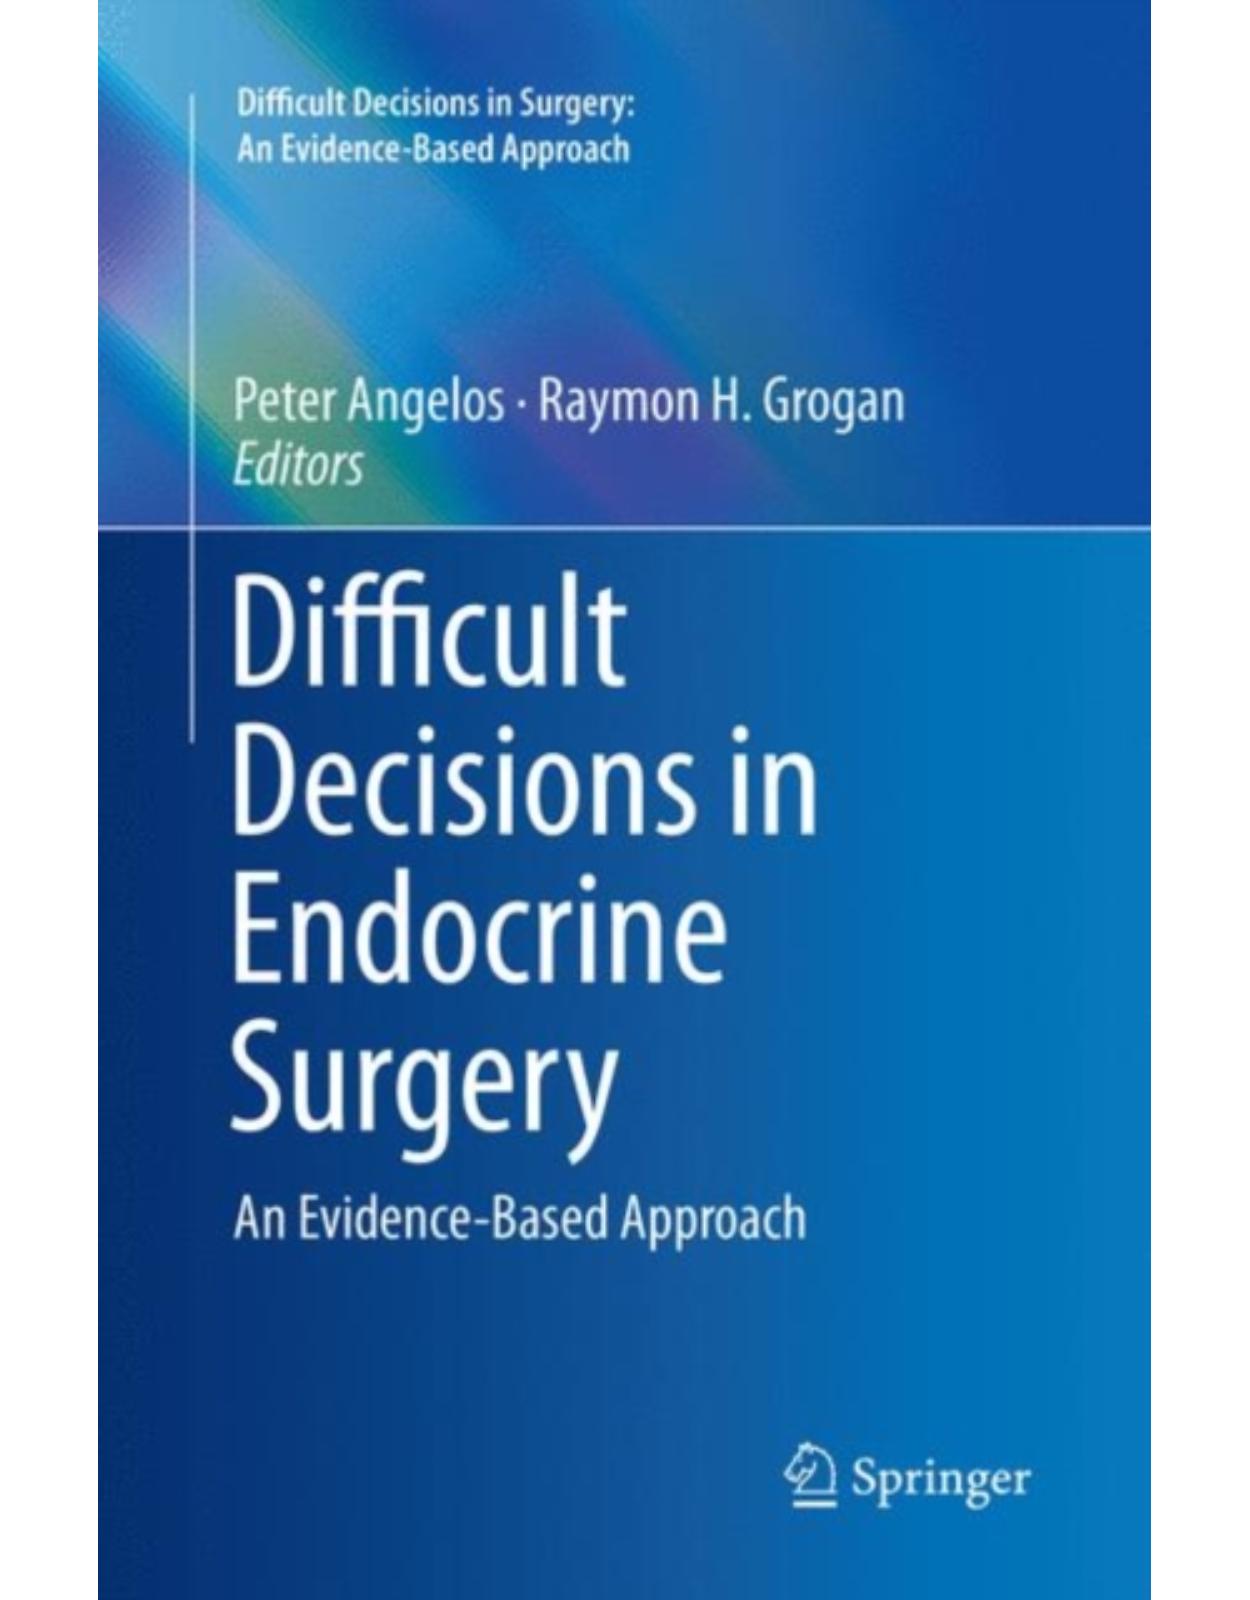 Difficult Decisions in Endocrine Surgery